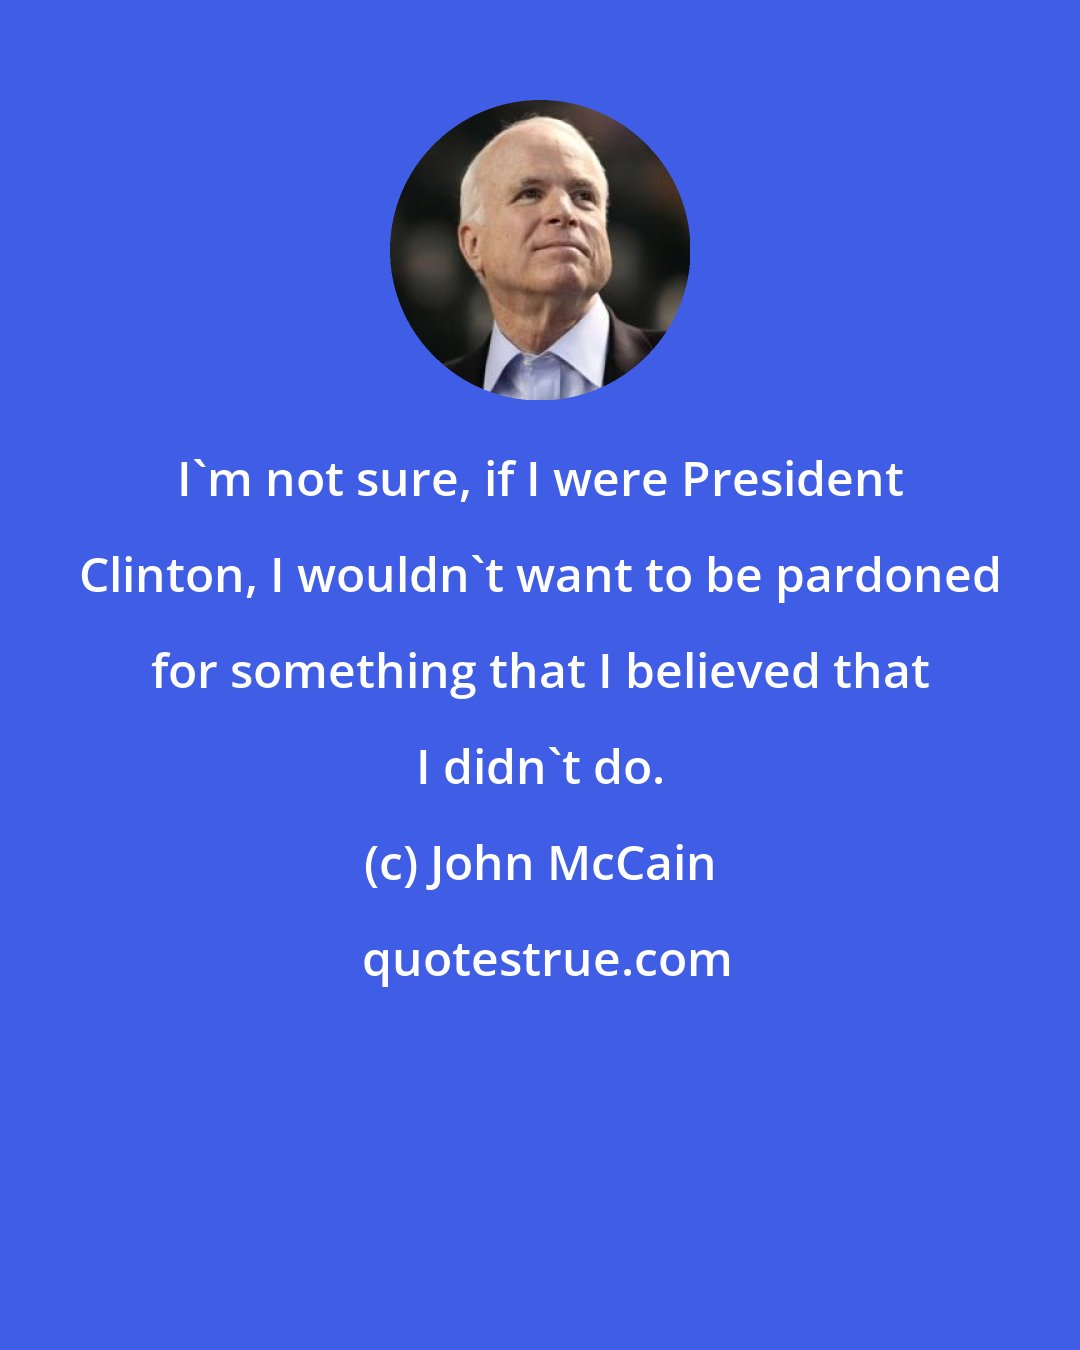 John McCain: I'm not sure, if I were President Clinton, I wouldn't want to be pardoned for something that I believed that I didn't do.